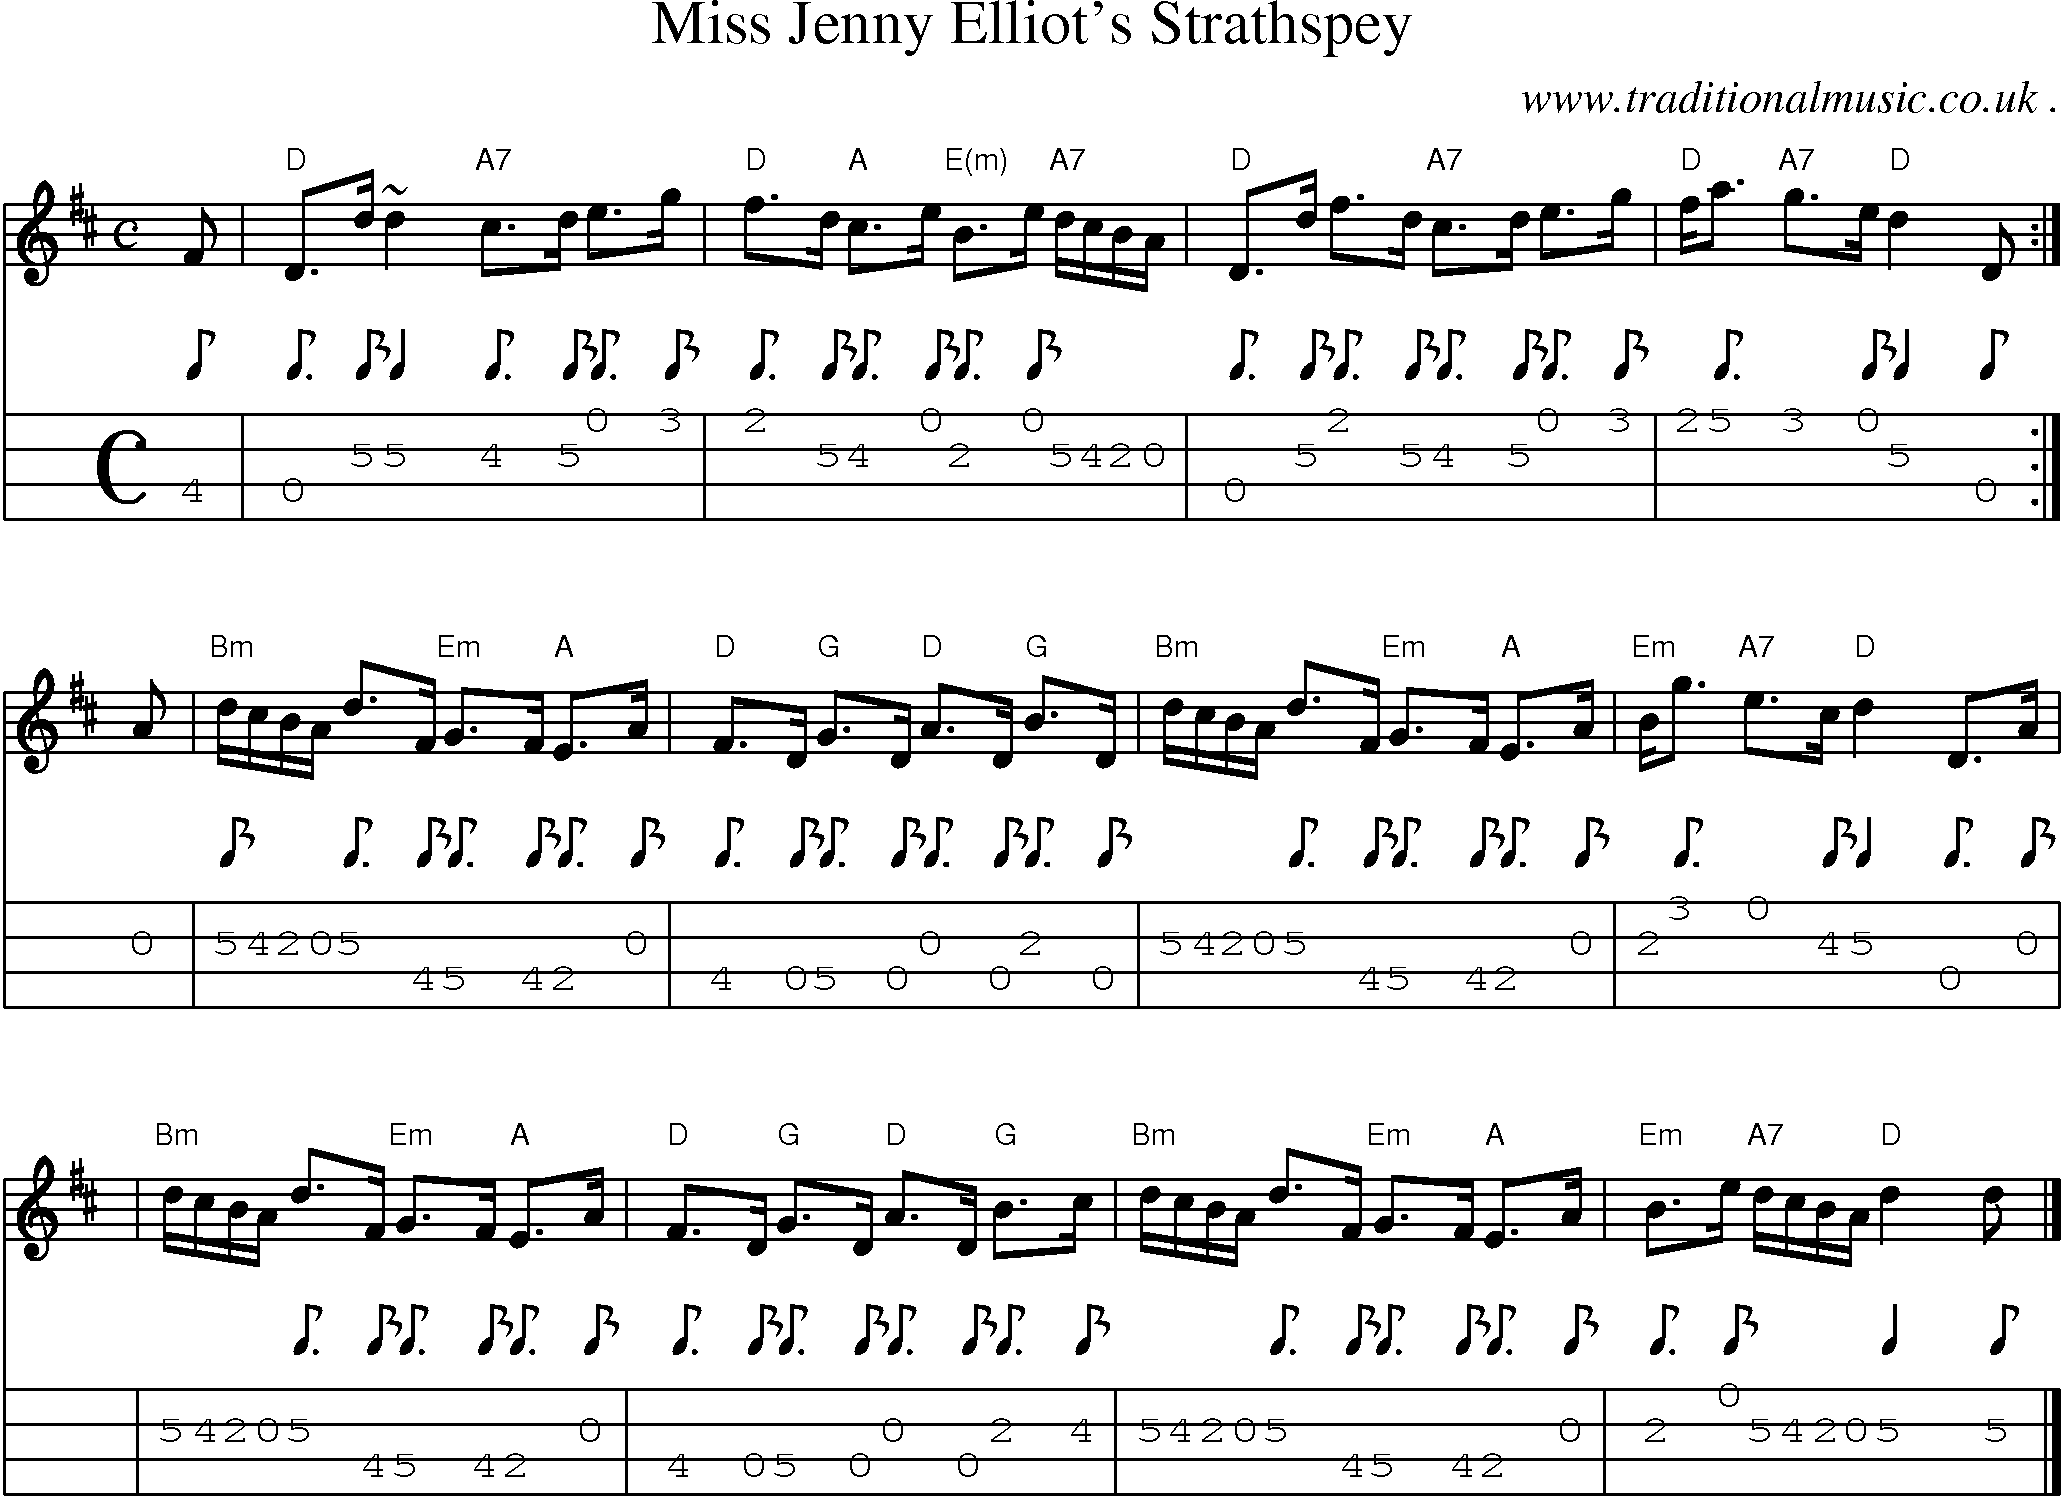 Sheet-music  score, Chords and Mandolin Tabs for Miss Jenny Elliots Strathspey